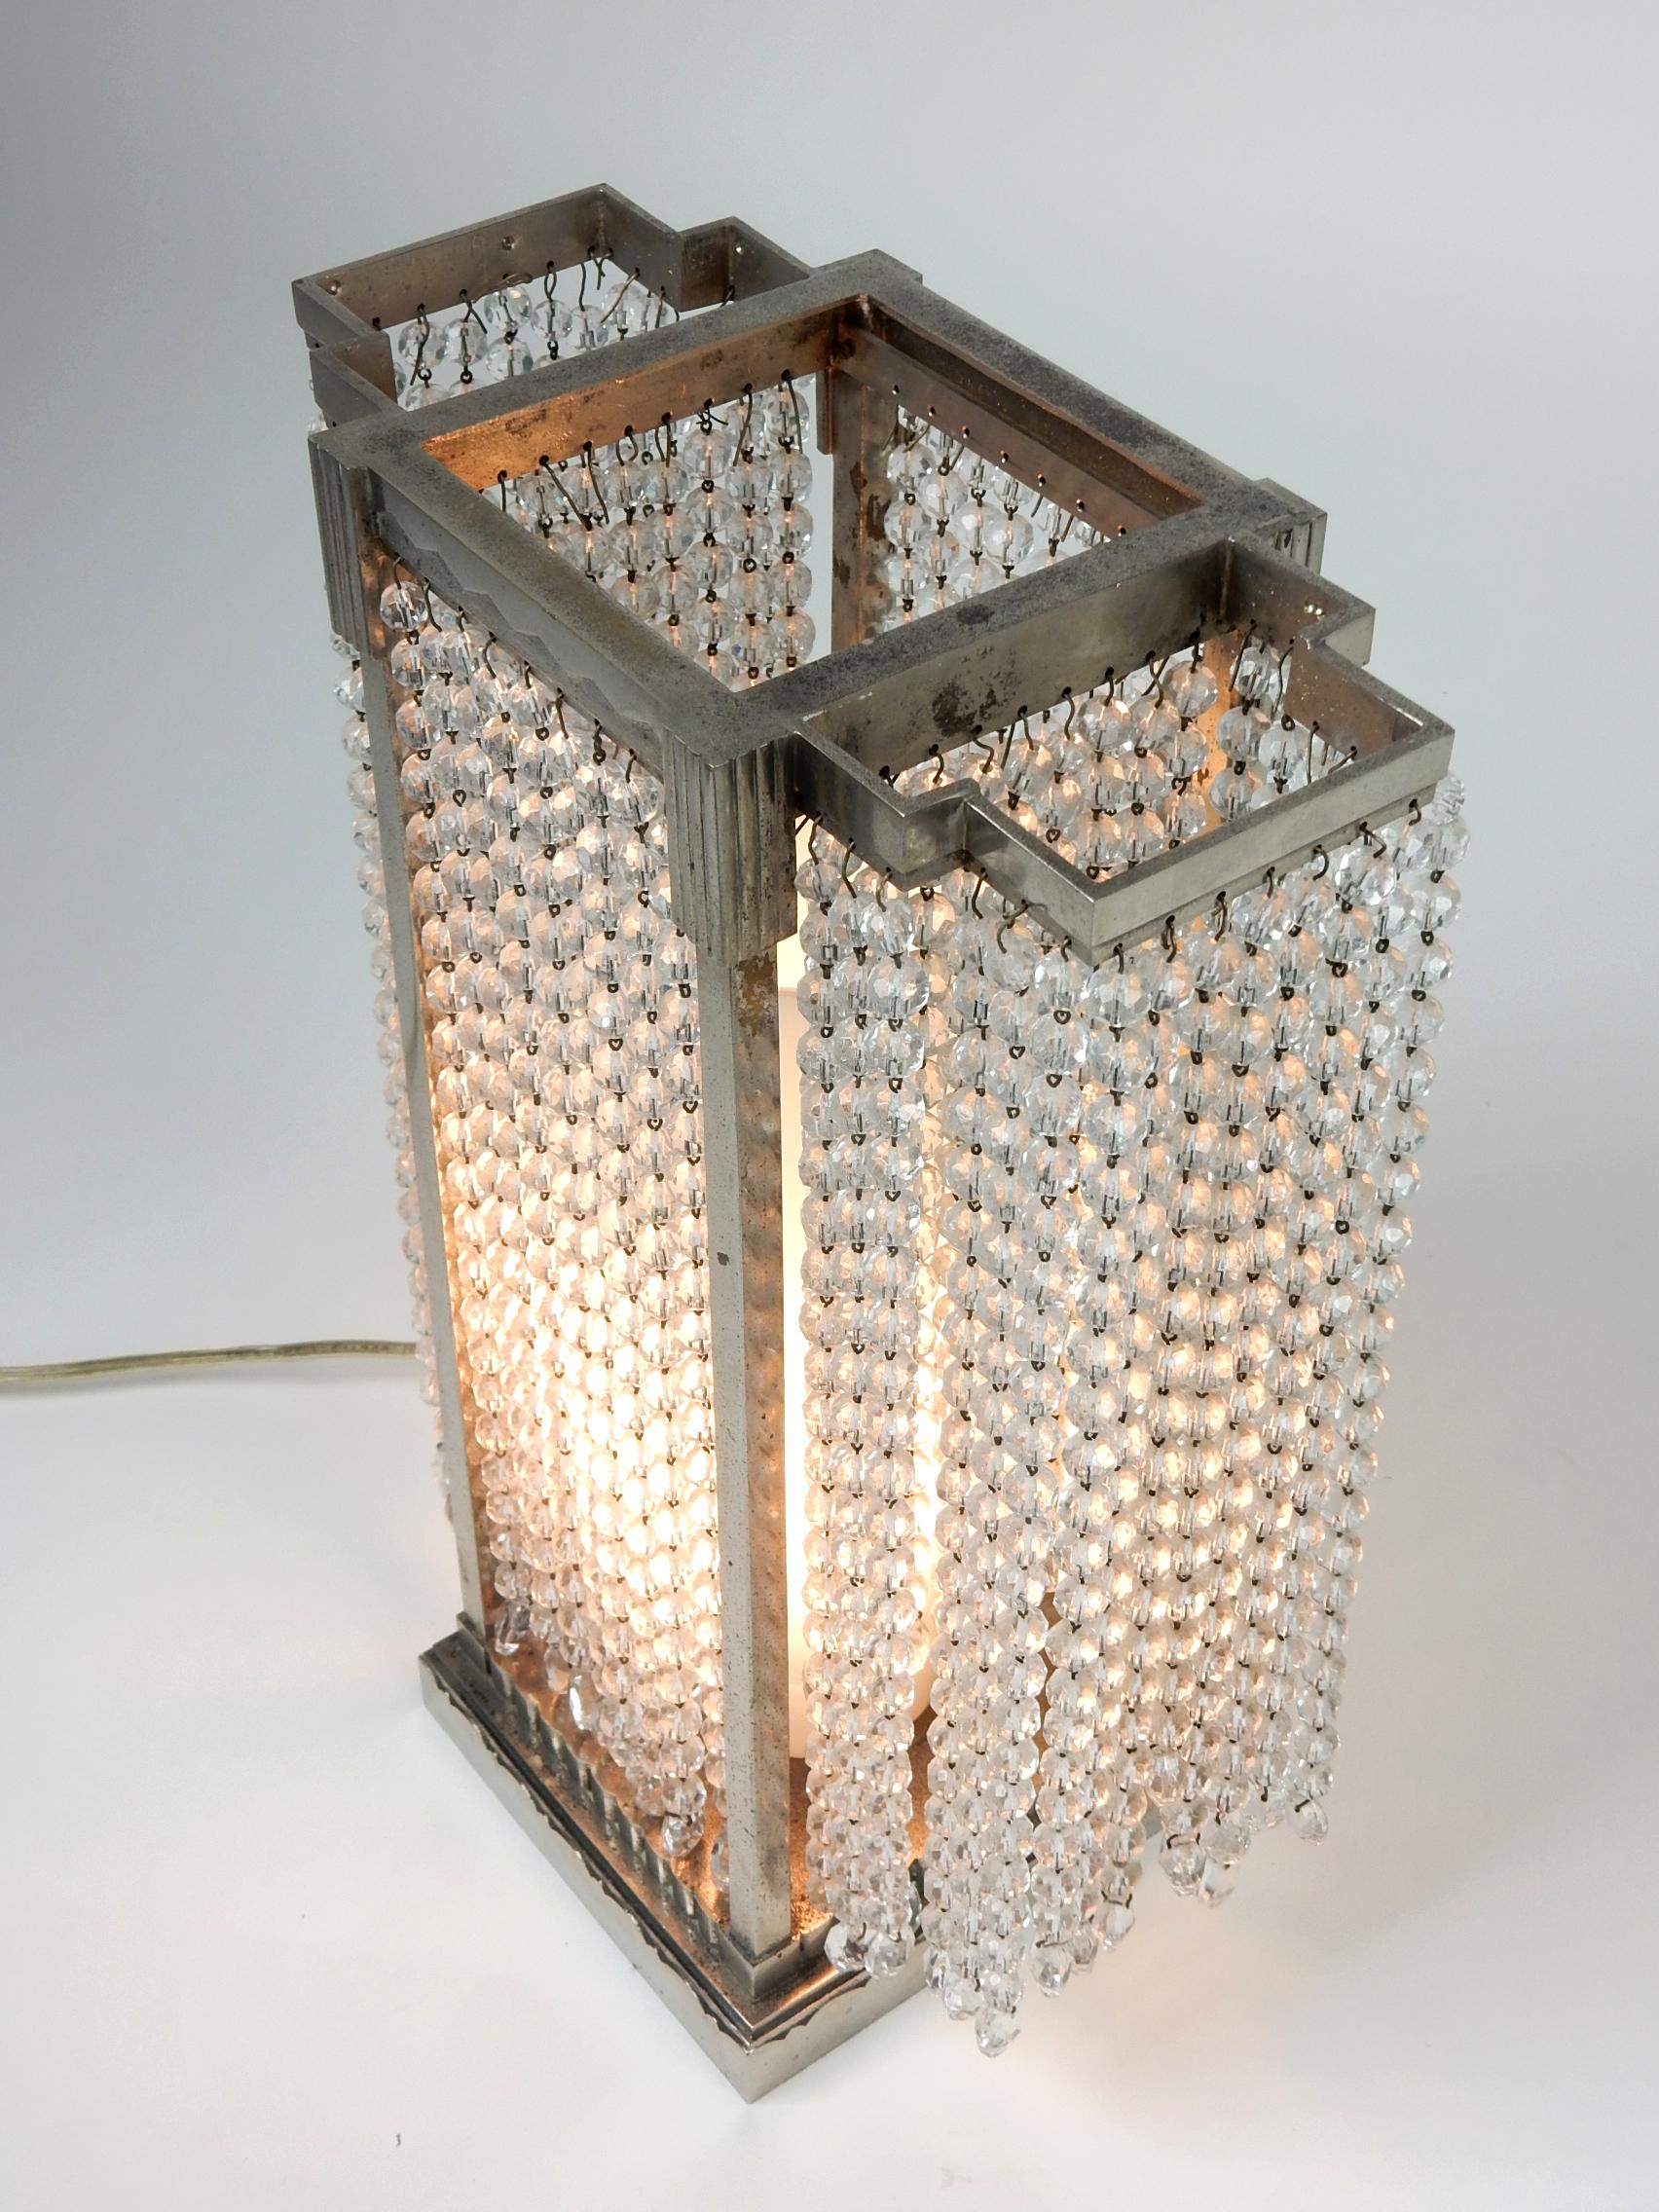 Incredible 1930s nickel silver plated and glass bead tabletop illuminare.
Stylist Art Deco skyscraper design frame. Single bulb socket with milk glass chimney.
Only manufacturer or design mark is 